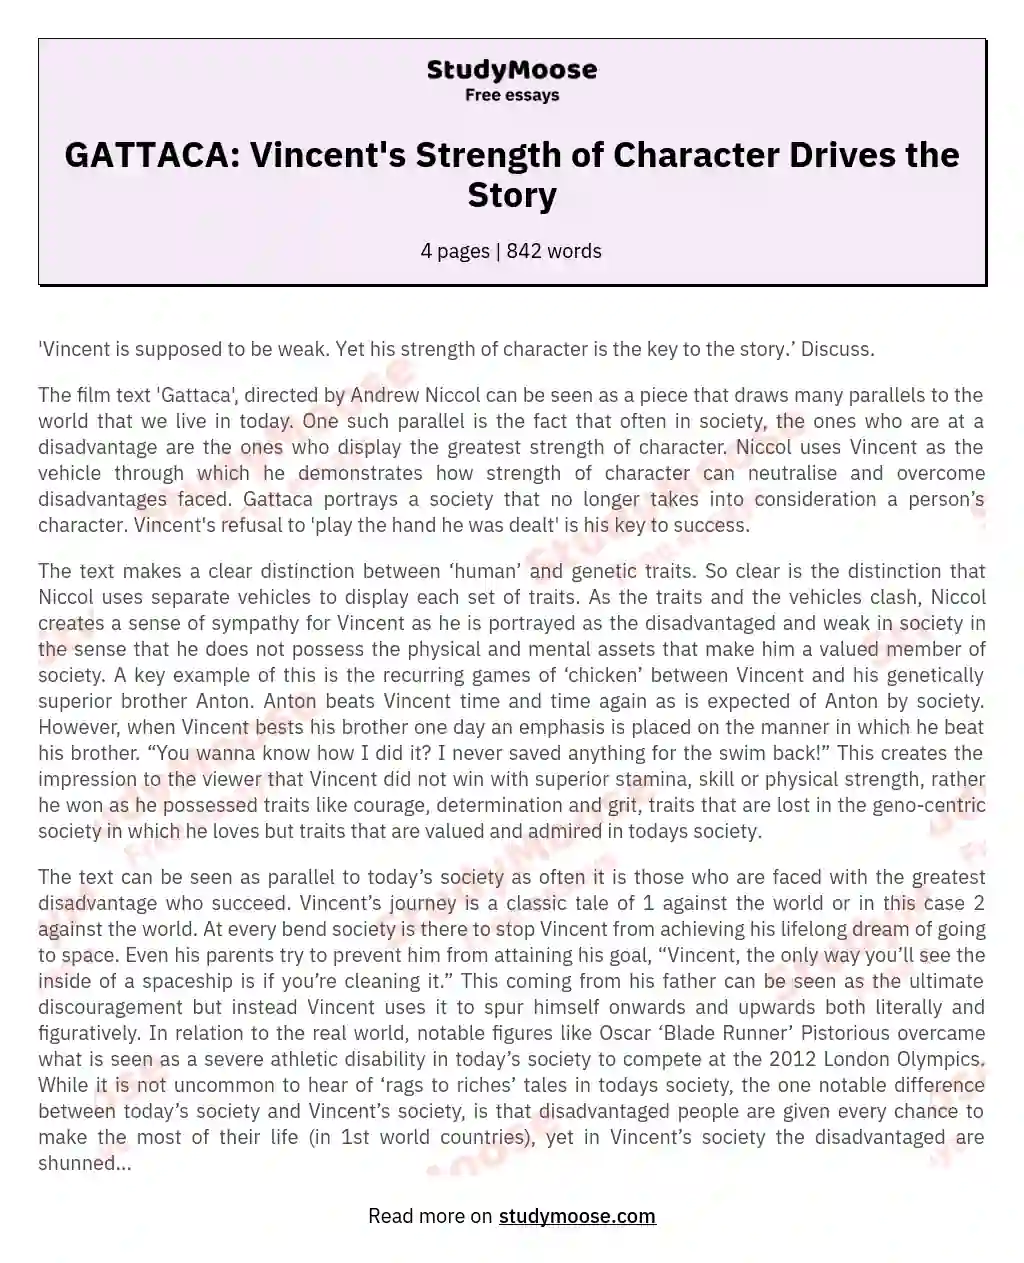 GATTACA: 'Vincent is supposed to be weak. Yet his strength of character is the key to the story.’